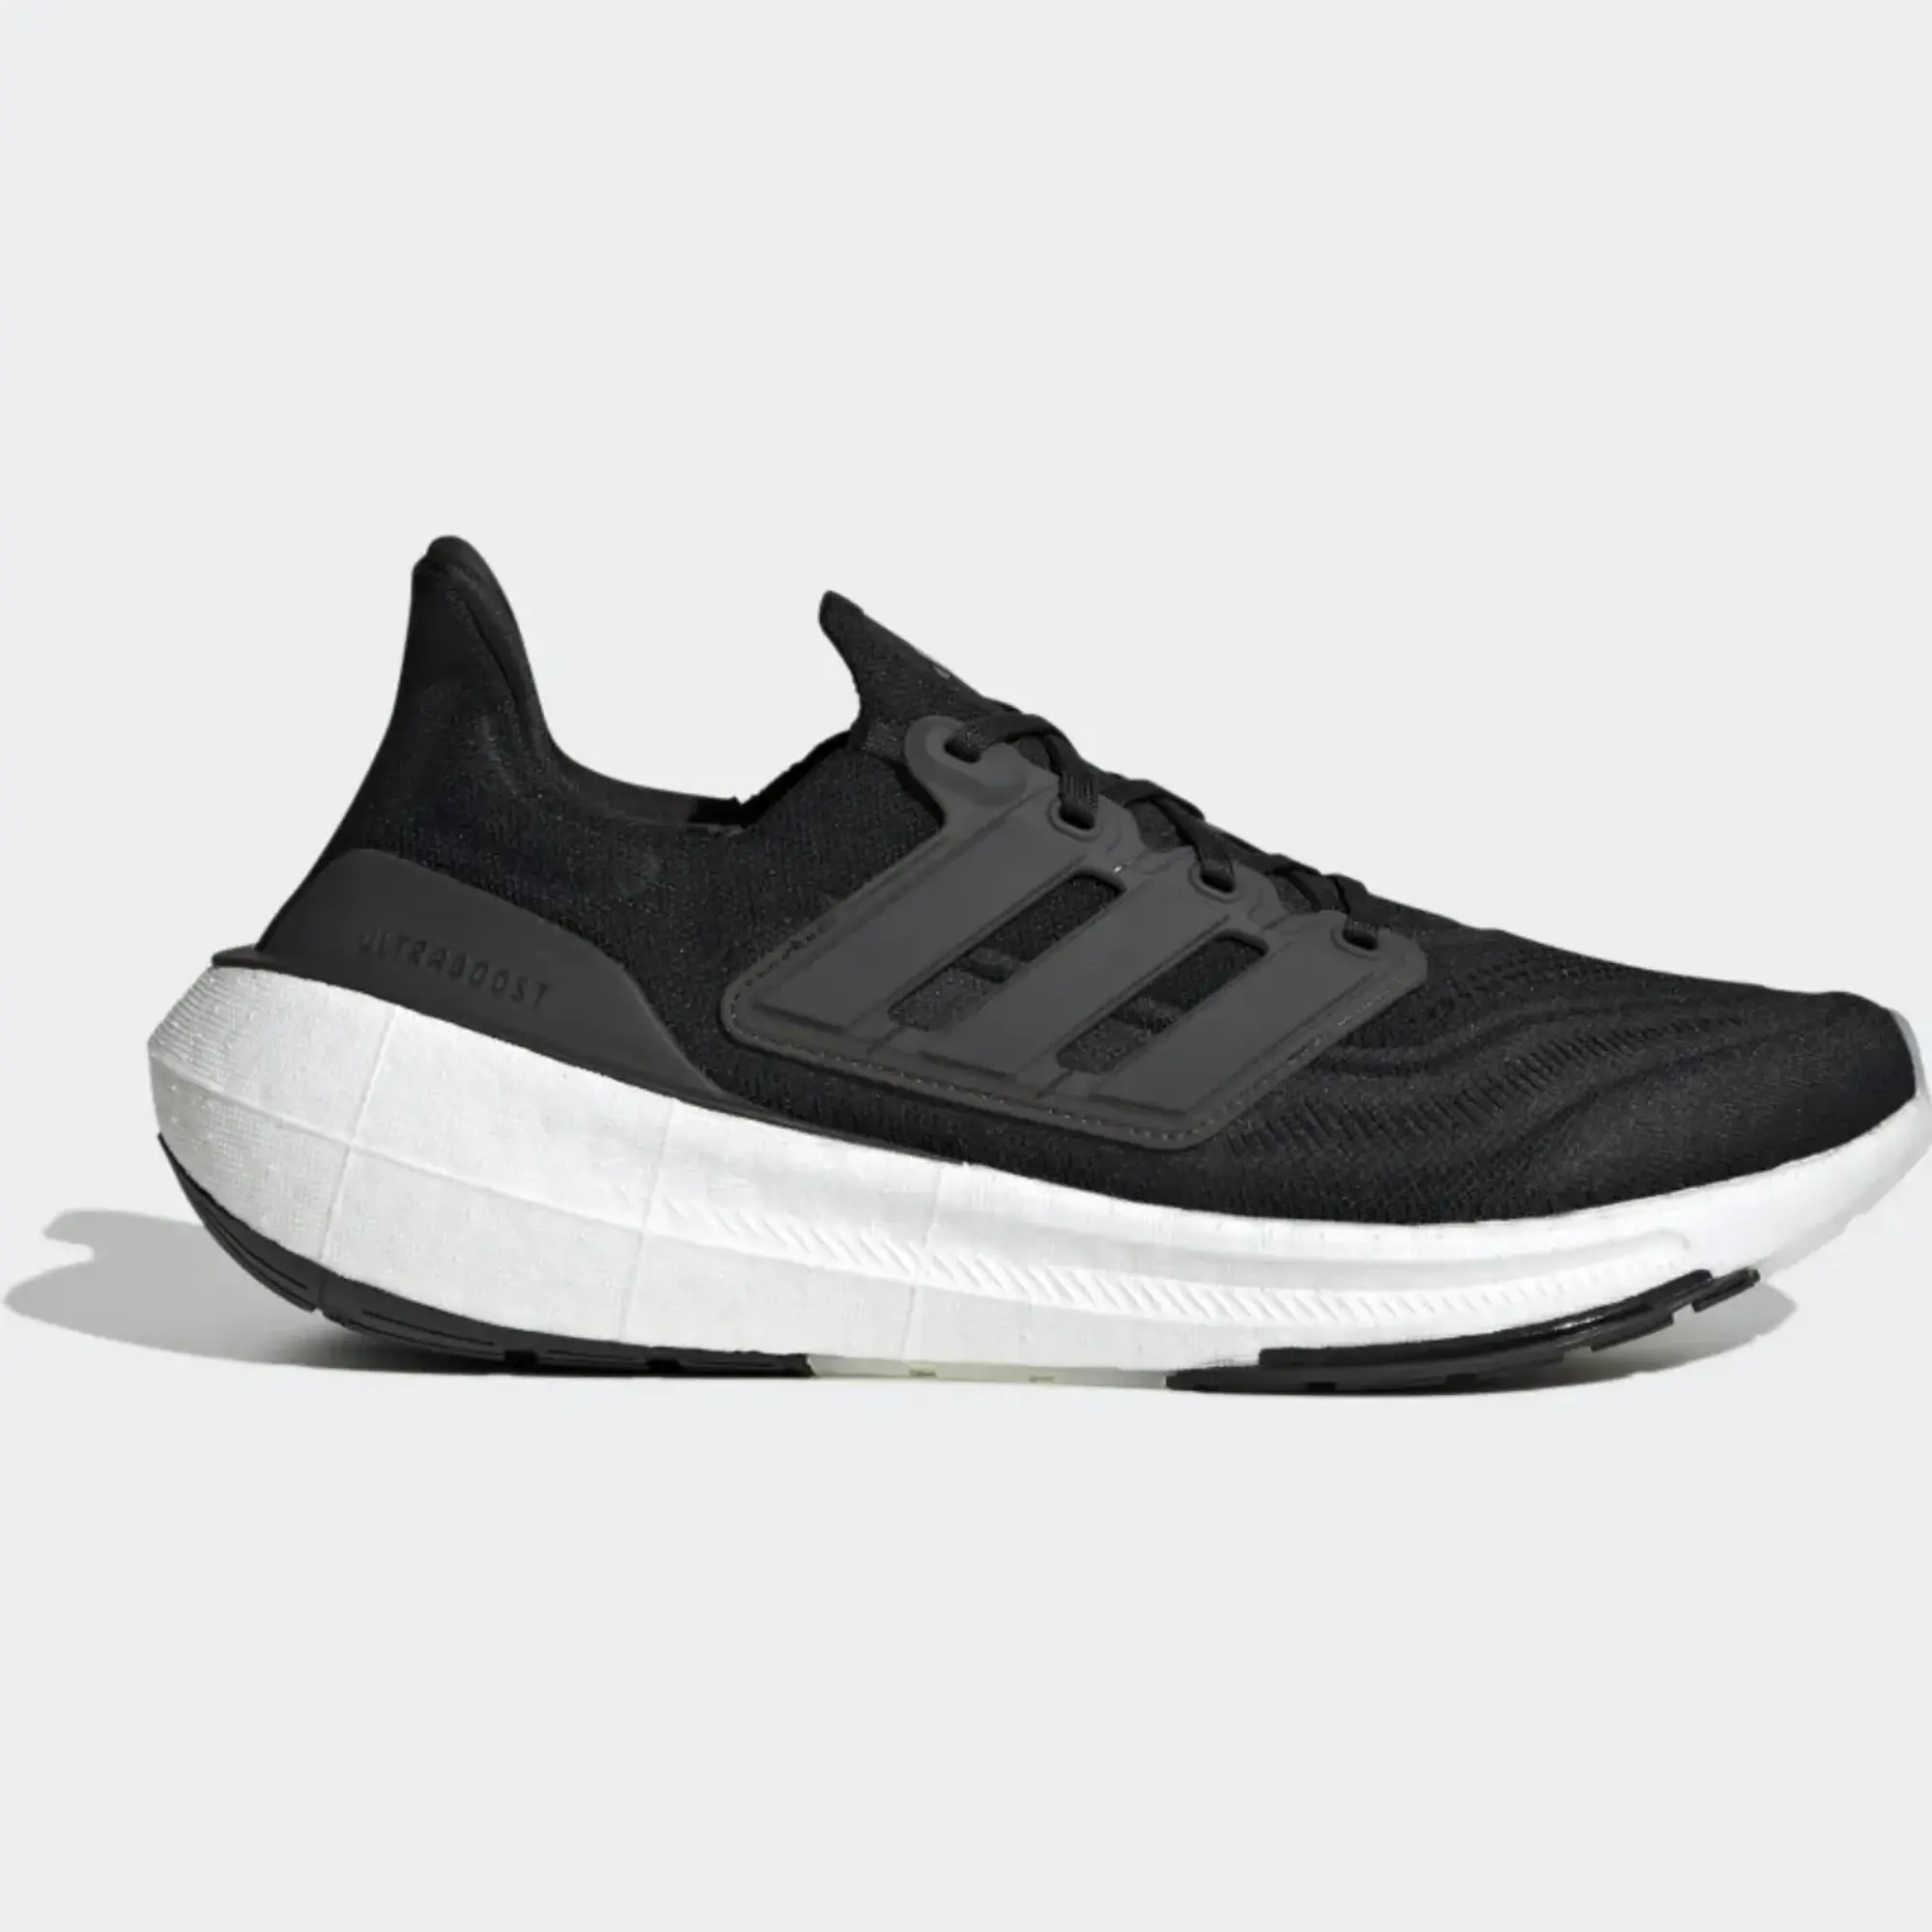 Adidas Running Ultraboost Light Trainers In Black And White